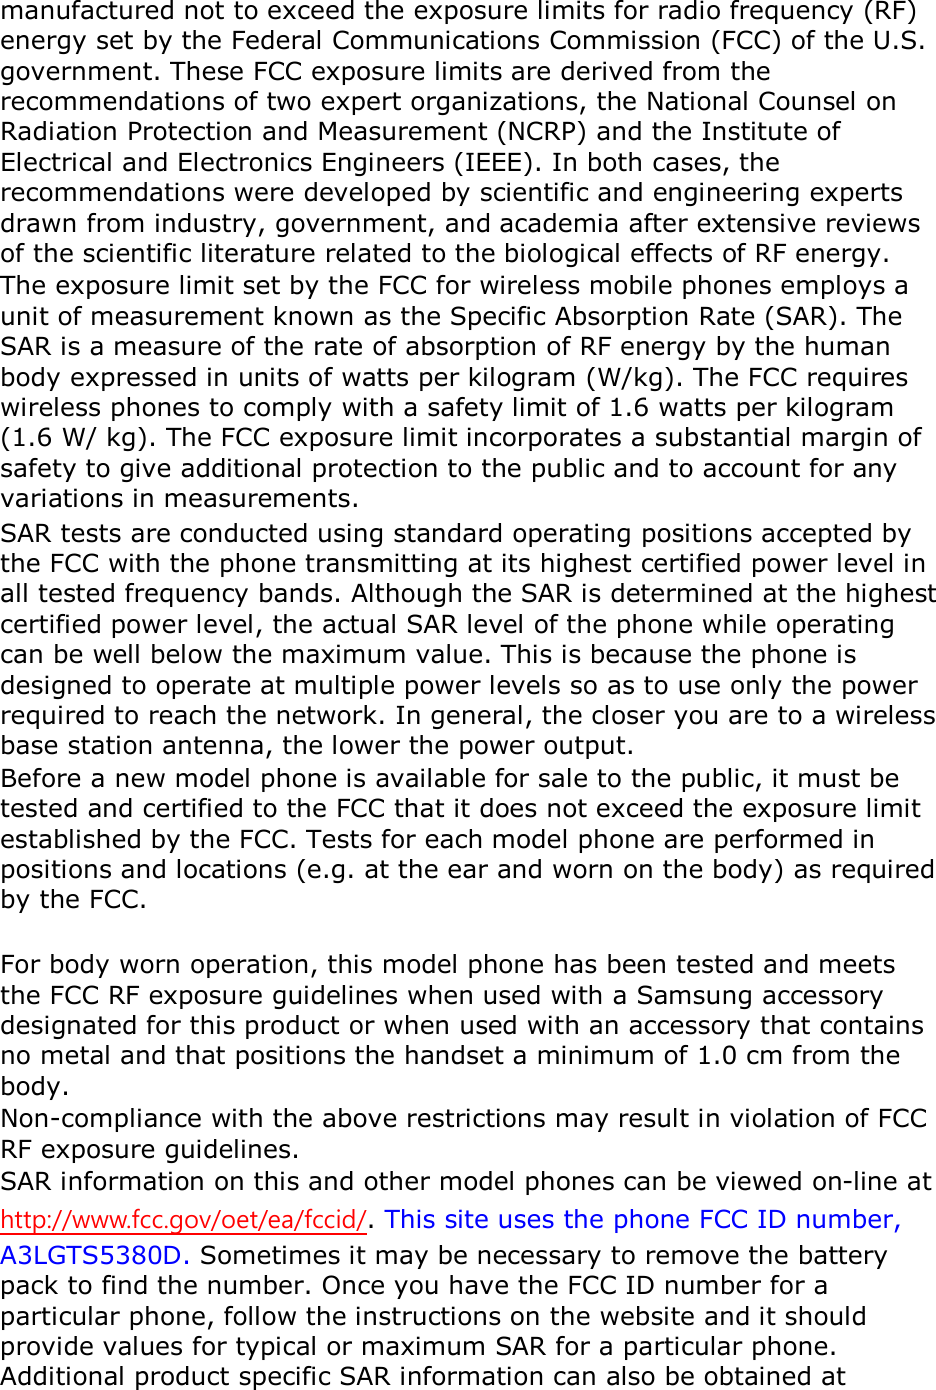 manufactured not to exceed the exposure limits for radio frequency (RF) energy set by the Federal Communications Commission (FCC) of the U.S. government. These FCC exposure limits are derived from the recommendations of two expert organizations, the National Counsel on Radiation Protection and Measurement (NCRP) and the Institute of Electrical and Electronics Engineers (IEEE). In both cases, the recommendations were developed by scientific and engineering experts drawn from industry, government, and academia after extensive reviews of the scientific literature related to the biological effects of RF energy. The exposure limit set by the FCC for wireless mobile phones employs a unit of measurement known as the Specific Absorption Rate (SAR). The SAR is a measure of the rate of absorption of RF energy by the human body expressed in units of watts per kilogram (W/kg). The FCC requires wireless phones to comply with a safety limit of 1.6 watts per kilogram (1.6 W/ kg). The FCC exposure limit incorporates a substantial margin of safety to give additional protection to the public and to account for any variations in measurements. SAR tests are conducted using standard operating positions accepted by the FCC with the phone transmitting at its highest certified power level in all tested frequency bands. Although the SAR is determined at the highest certified power level, the actual SAR level of the phone while operating can be well below the maximum value. This is because the phone is designed to operate at multiple power levels so as to use only the power required to reach the network. In general, the closer you are to a wireless base station antenna, the lower the power output. Before a new model phone is available for sale to the public, it must be tested and certified to the FCC that it does not exceed the exposure limit established by the FCC. Tests for each model phone are performed in positions and locations (e.g. at the ear and worn on the body) as required by the FCC.      For body worn operation, this model phone has been tested and meets the FCC RF exposure guidelines when used with a Samsung accessory designated for this product or when used with an accessory that contains no metal and that positions the handset a minimum of 1.0 cm from the body.   Non-compliance with the above restrictions may result in violation of FCC RF exposure guidelines. SAR information on this and other model phones can be viewed on-line at http://www.fcc.gov/oet/ea/fccid/. This site uses the phone FCC ID number, A3LGTS5380D. Sometimes it may be necessary to remove the battery pack to find the number. Once you have the FCC ID number for a particular phone, follow the instructions on the website and it should provide values for typical or maximum SAR for a particular phone. Additional product specific SAR information can also be obtained at 